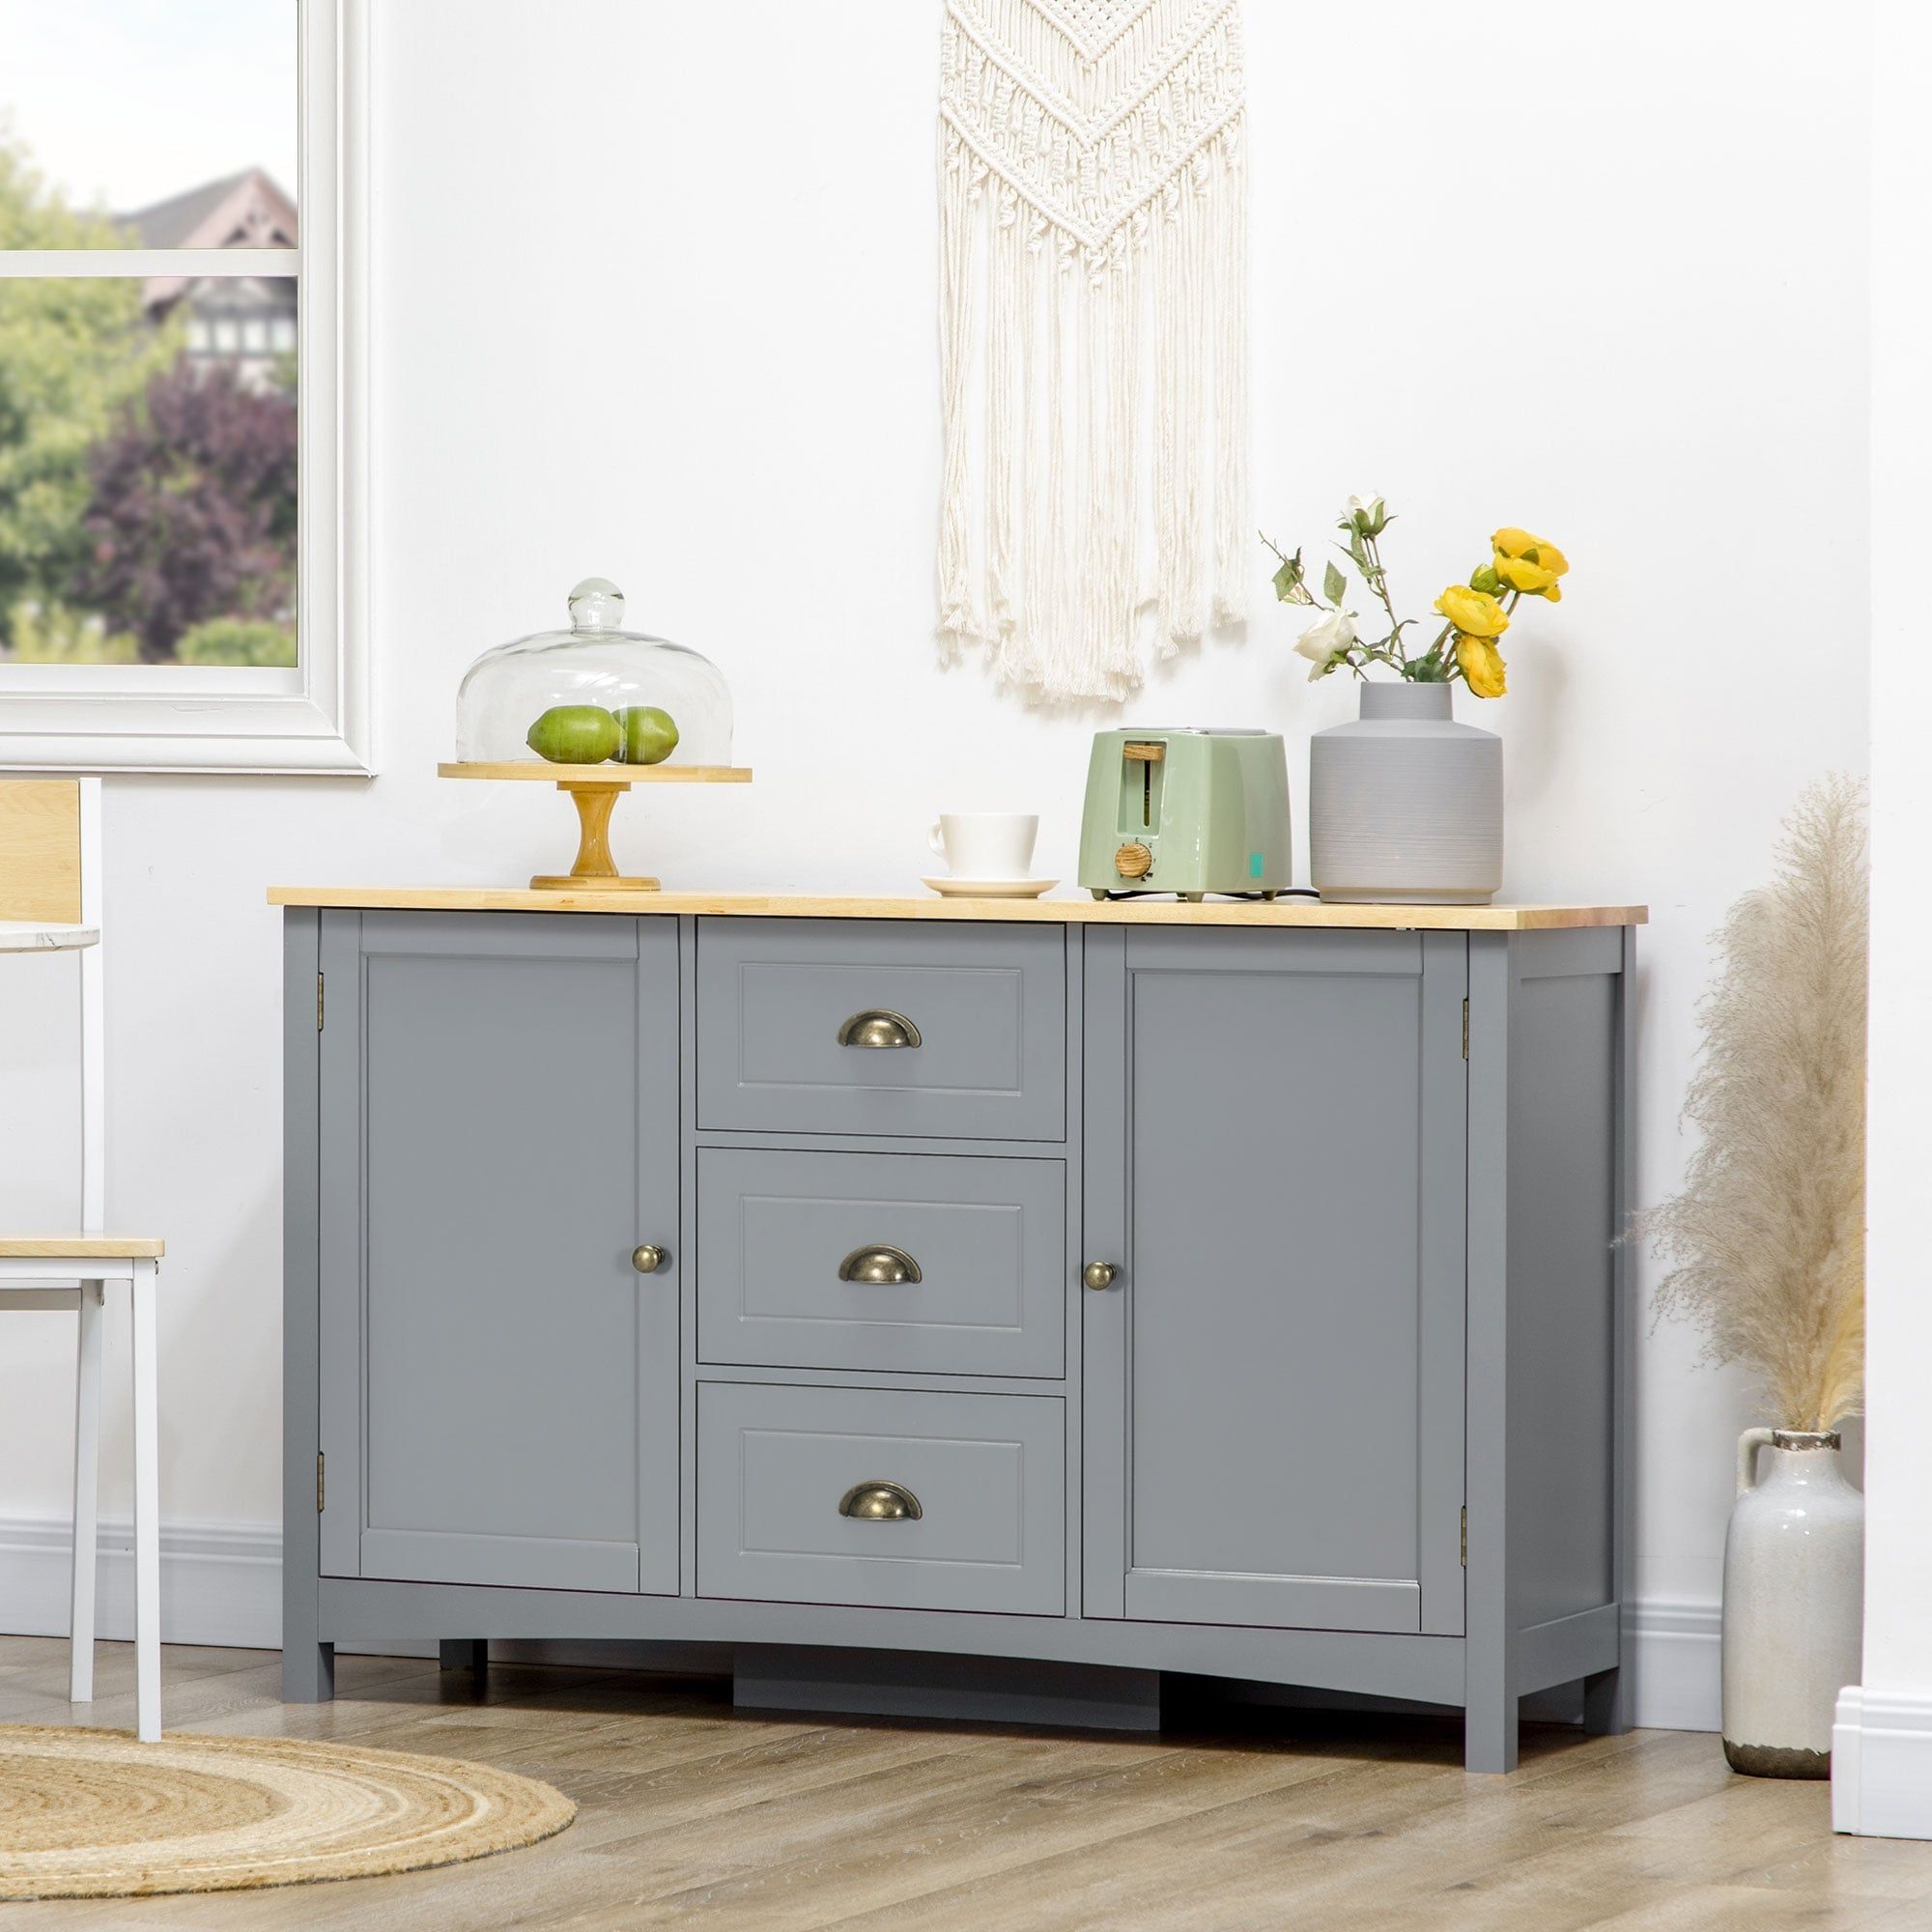 Sideboards With Rubberwood Top With Regard To Trendy Homcom Sideboard Buffet Cabinet, Retro Kitchen Cabinet, Coffee Bar Cabinet  With Rubber Wood Top, Drawers, Entryway, Gray – Bed Bath & Beyond – 38858360 (Photo 7 of 10)